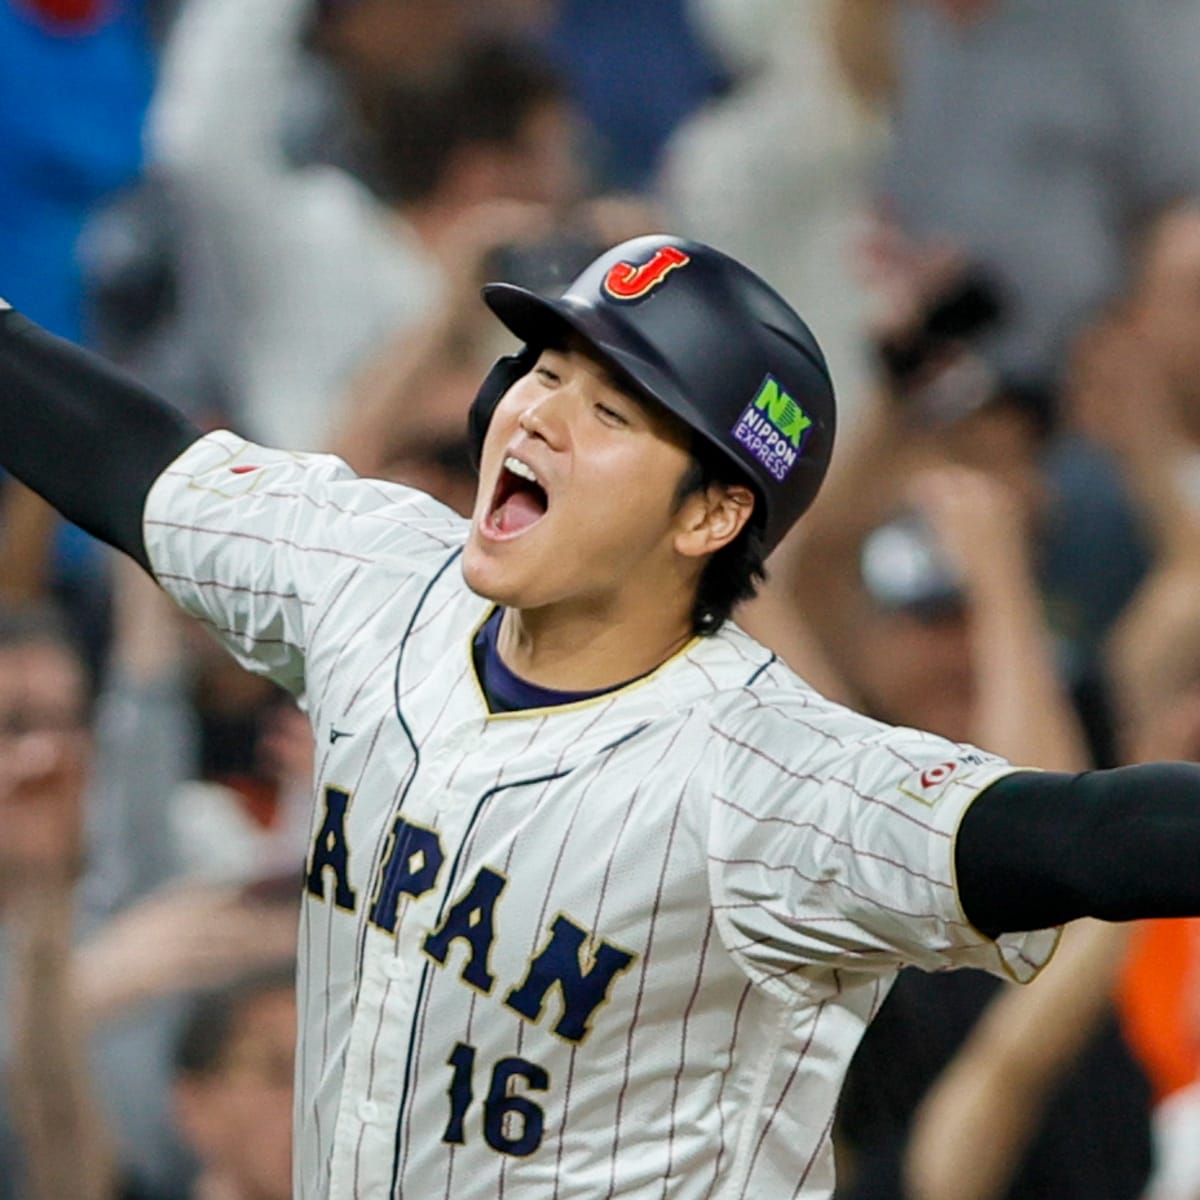 Japanese Yankees fans make pitch for Shohei Ohtani, who could be